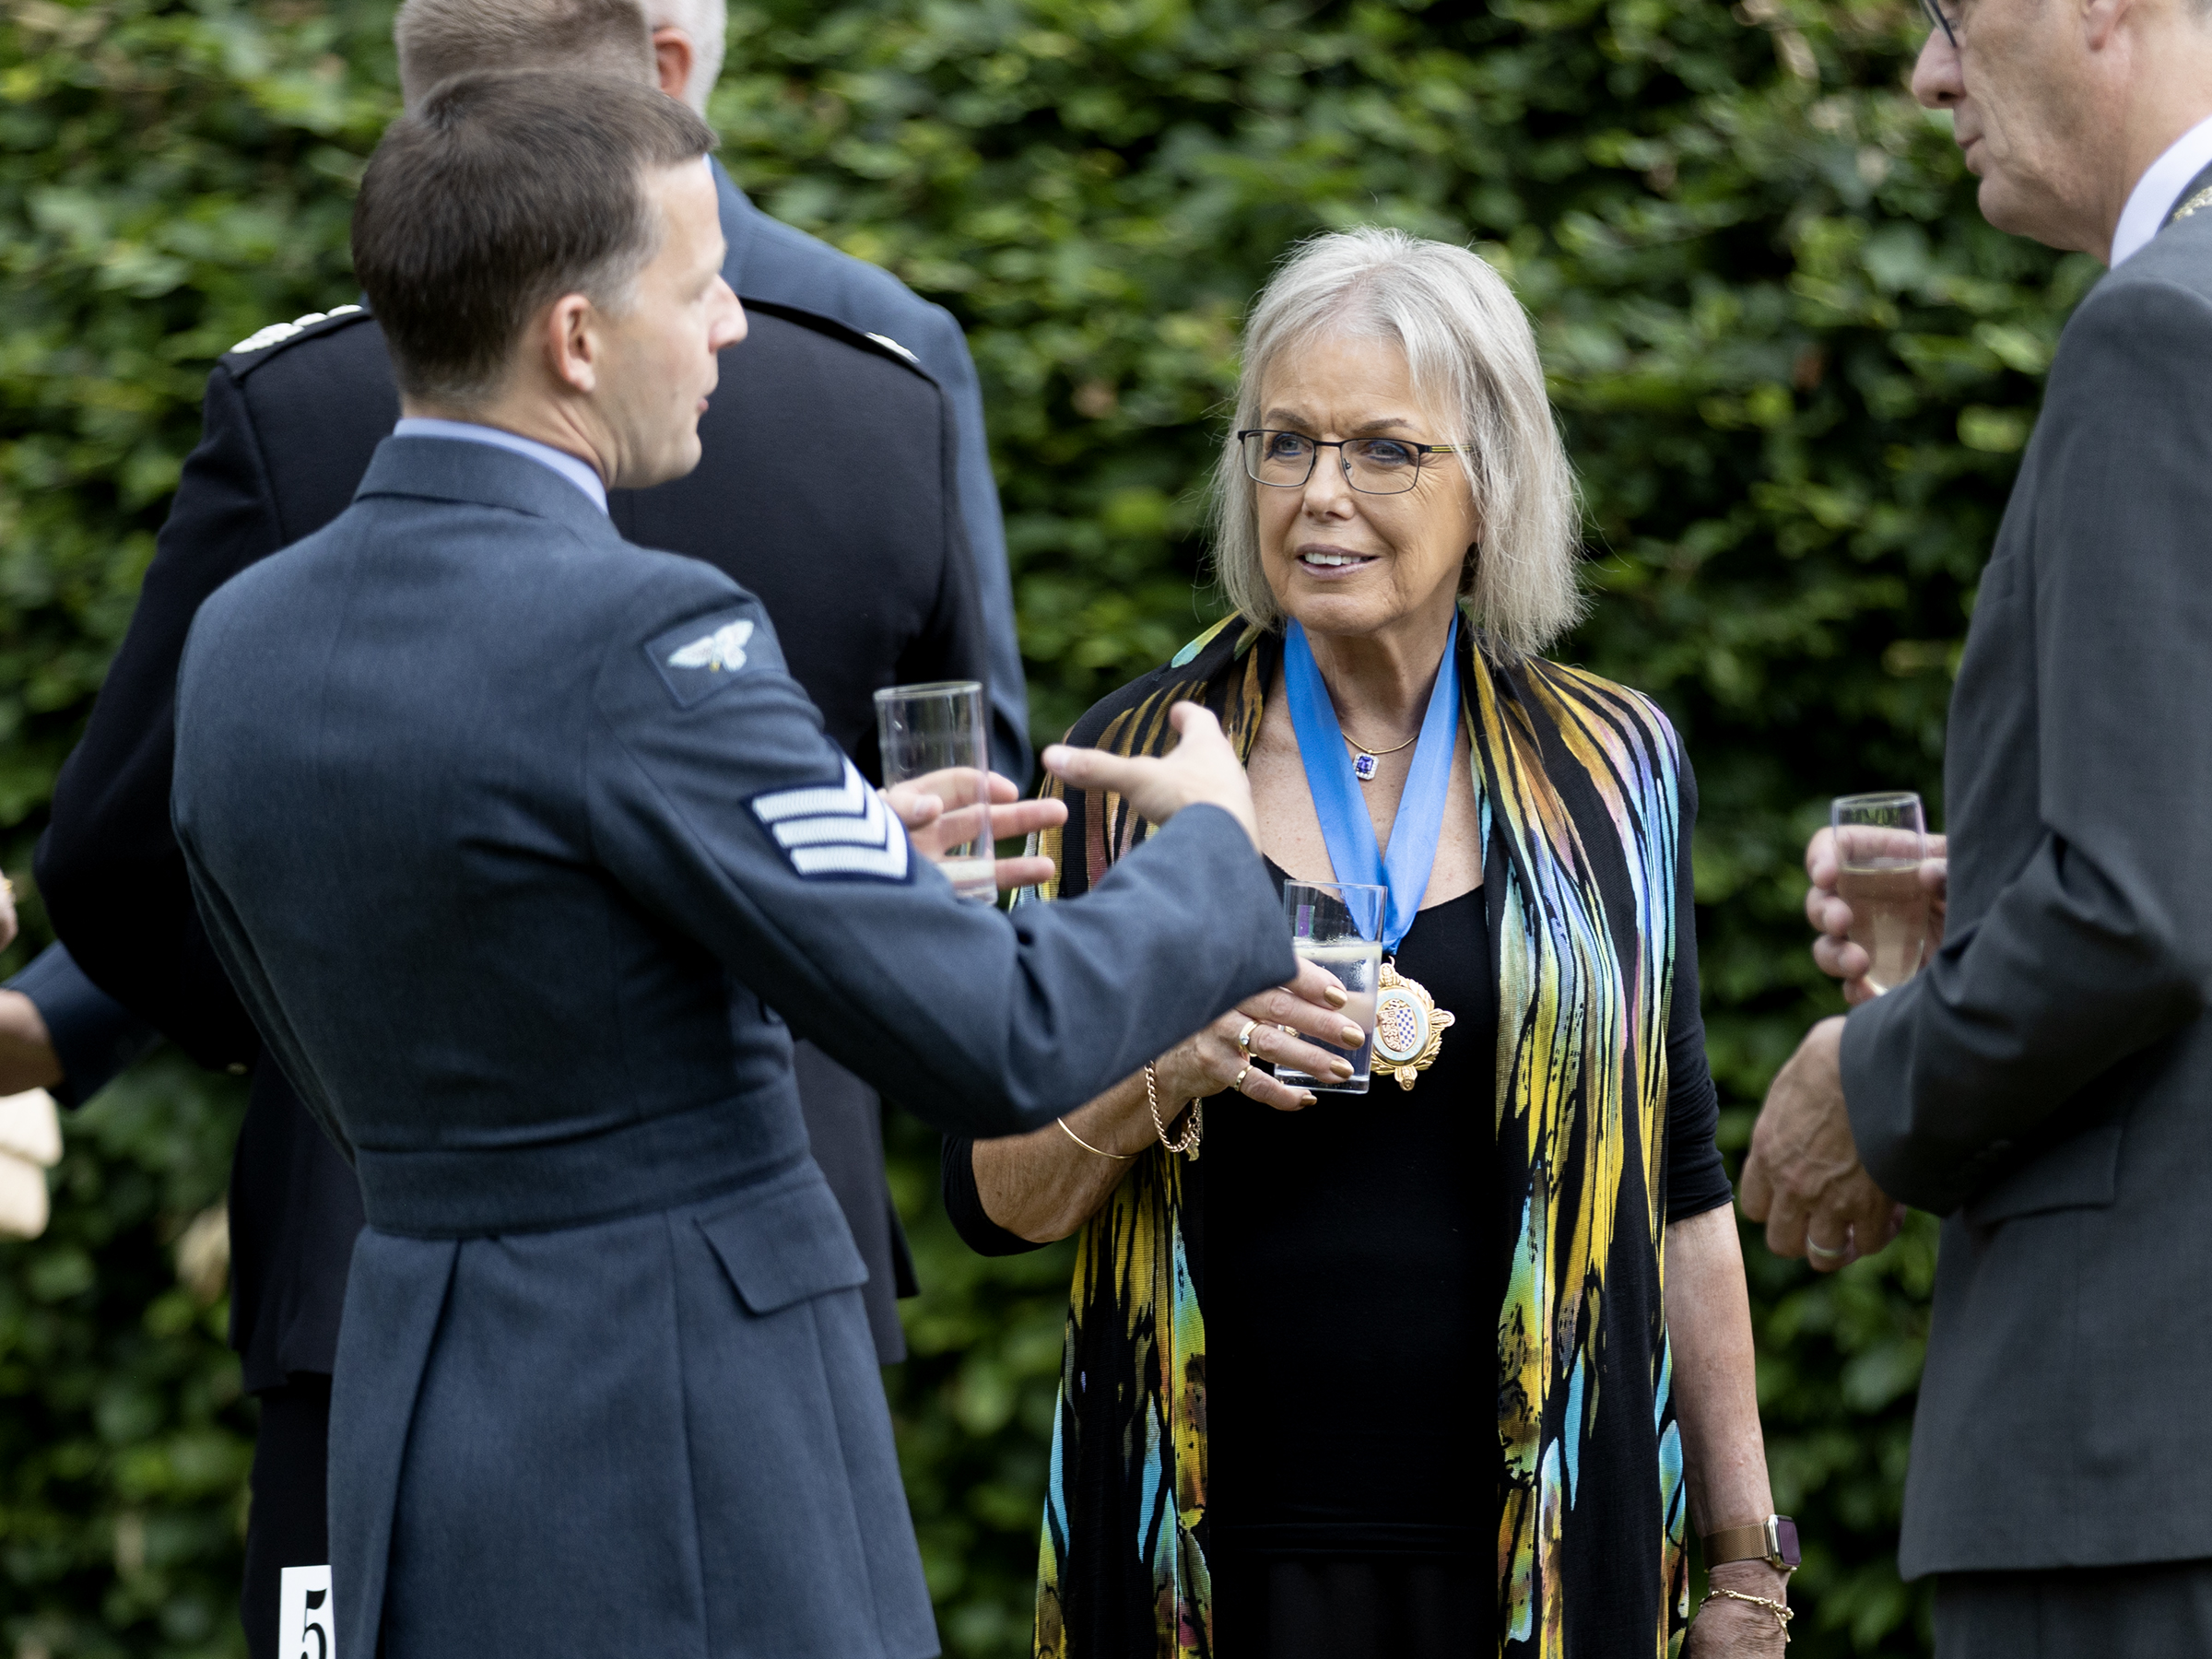 Guests and personnel at RAF Wittering’s Annual Formal Reception